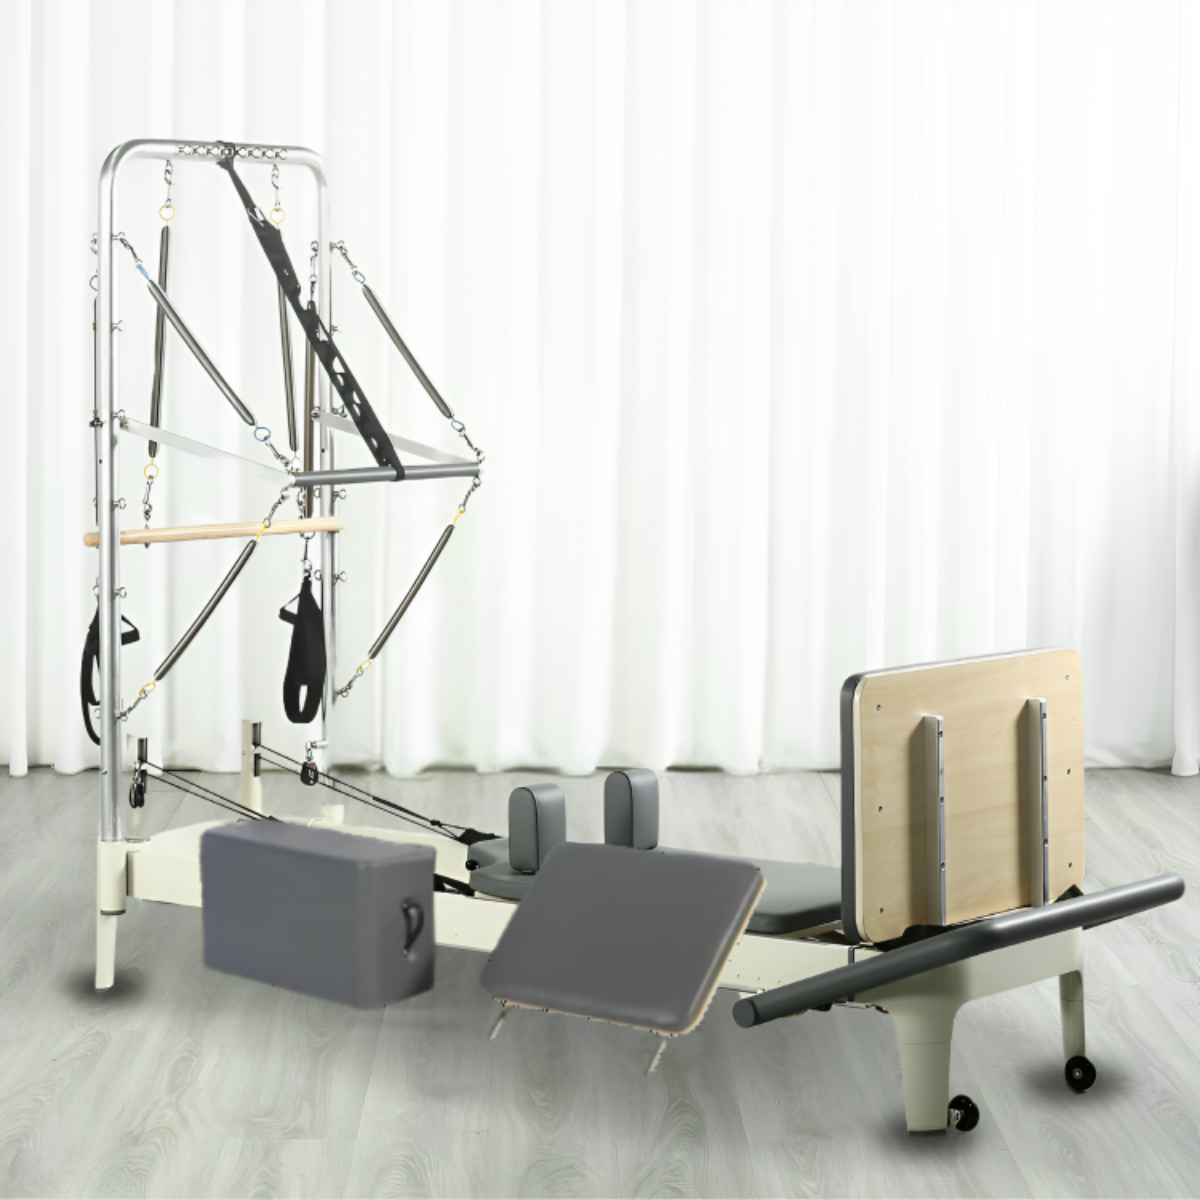 Pilates Reformer with tower - Pilates Luxury Reformer